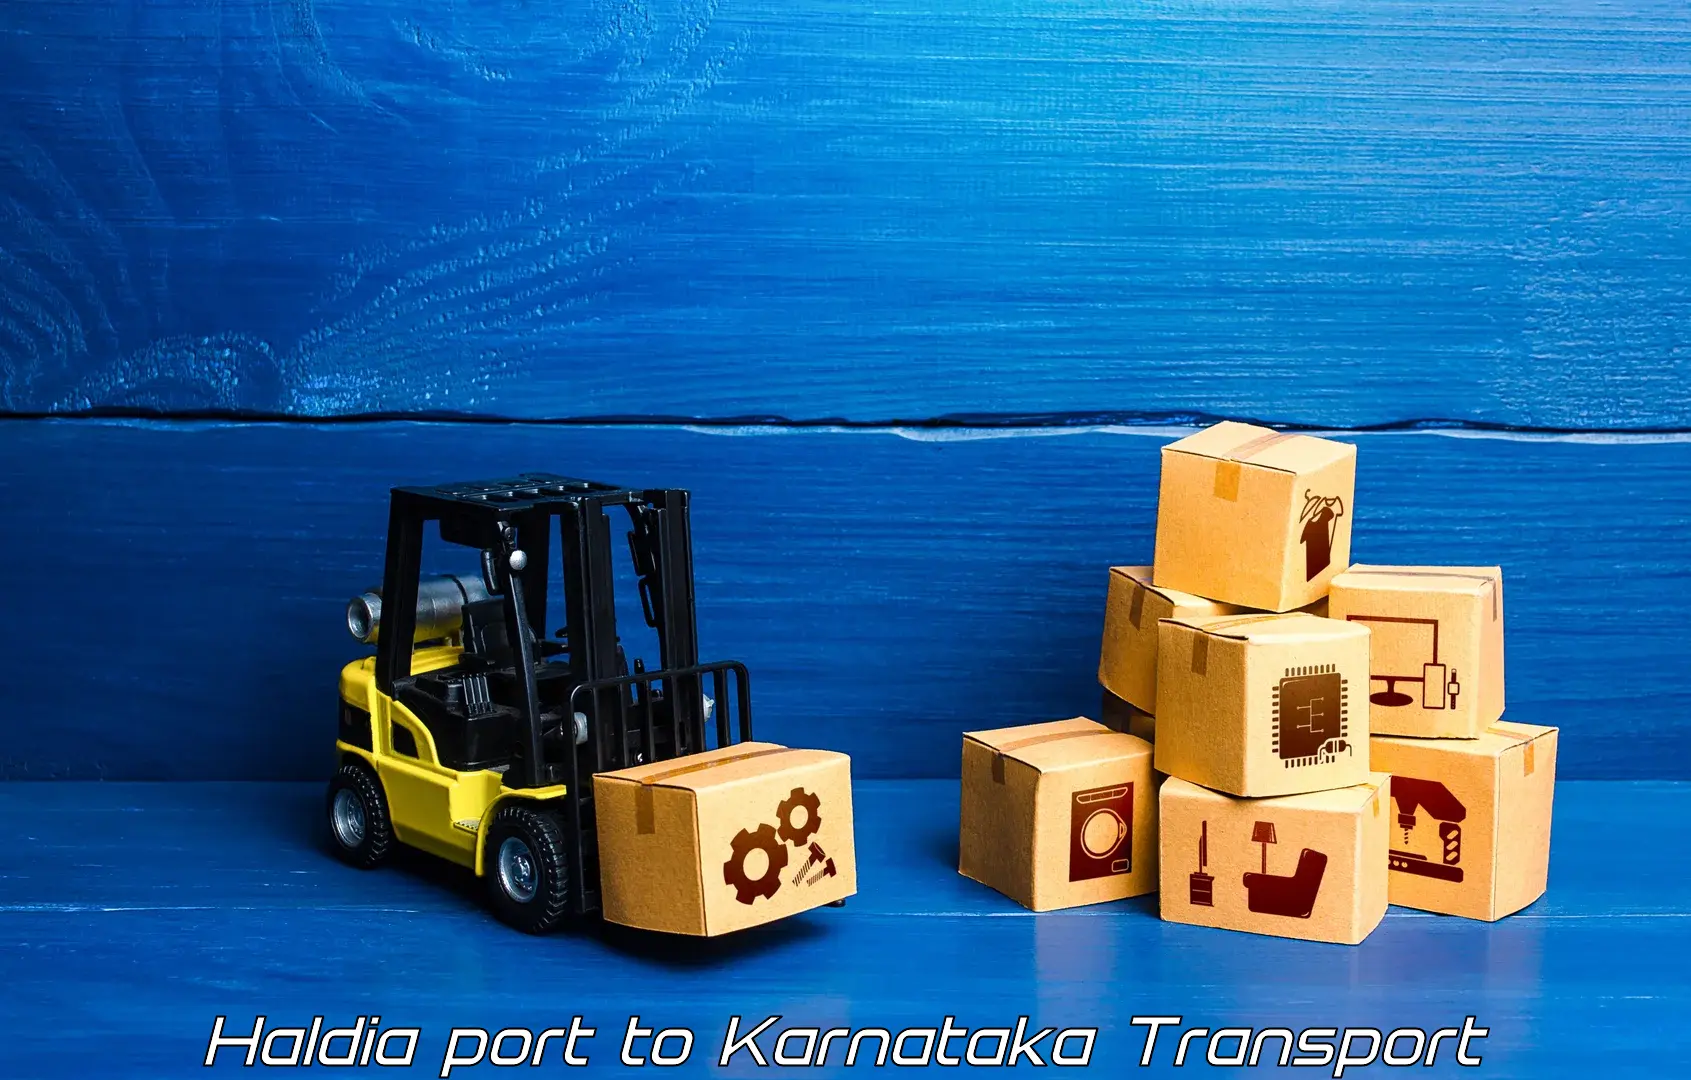 Transport bike from one state to another Haldia port to Malur